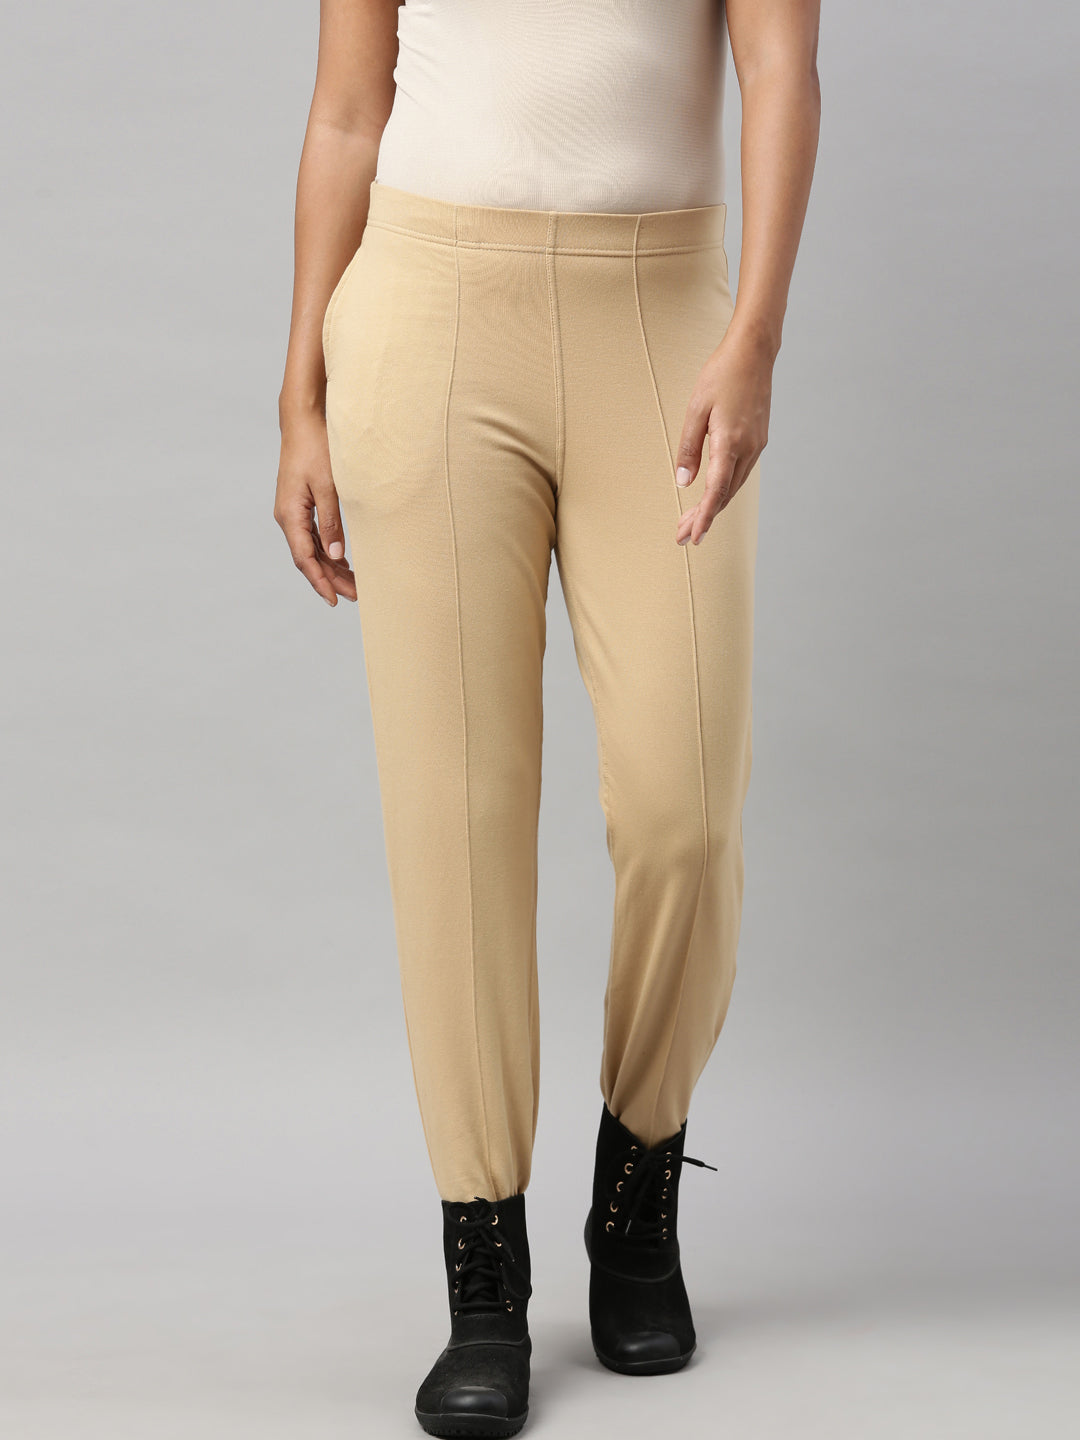 Go Colors Pants  Buy Go Colors Women Solid Dusty Rose Cotton Pencil Pant  Online  Nykaa Fashion